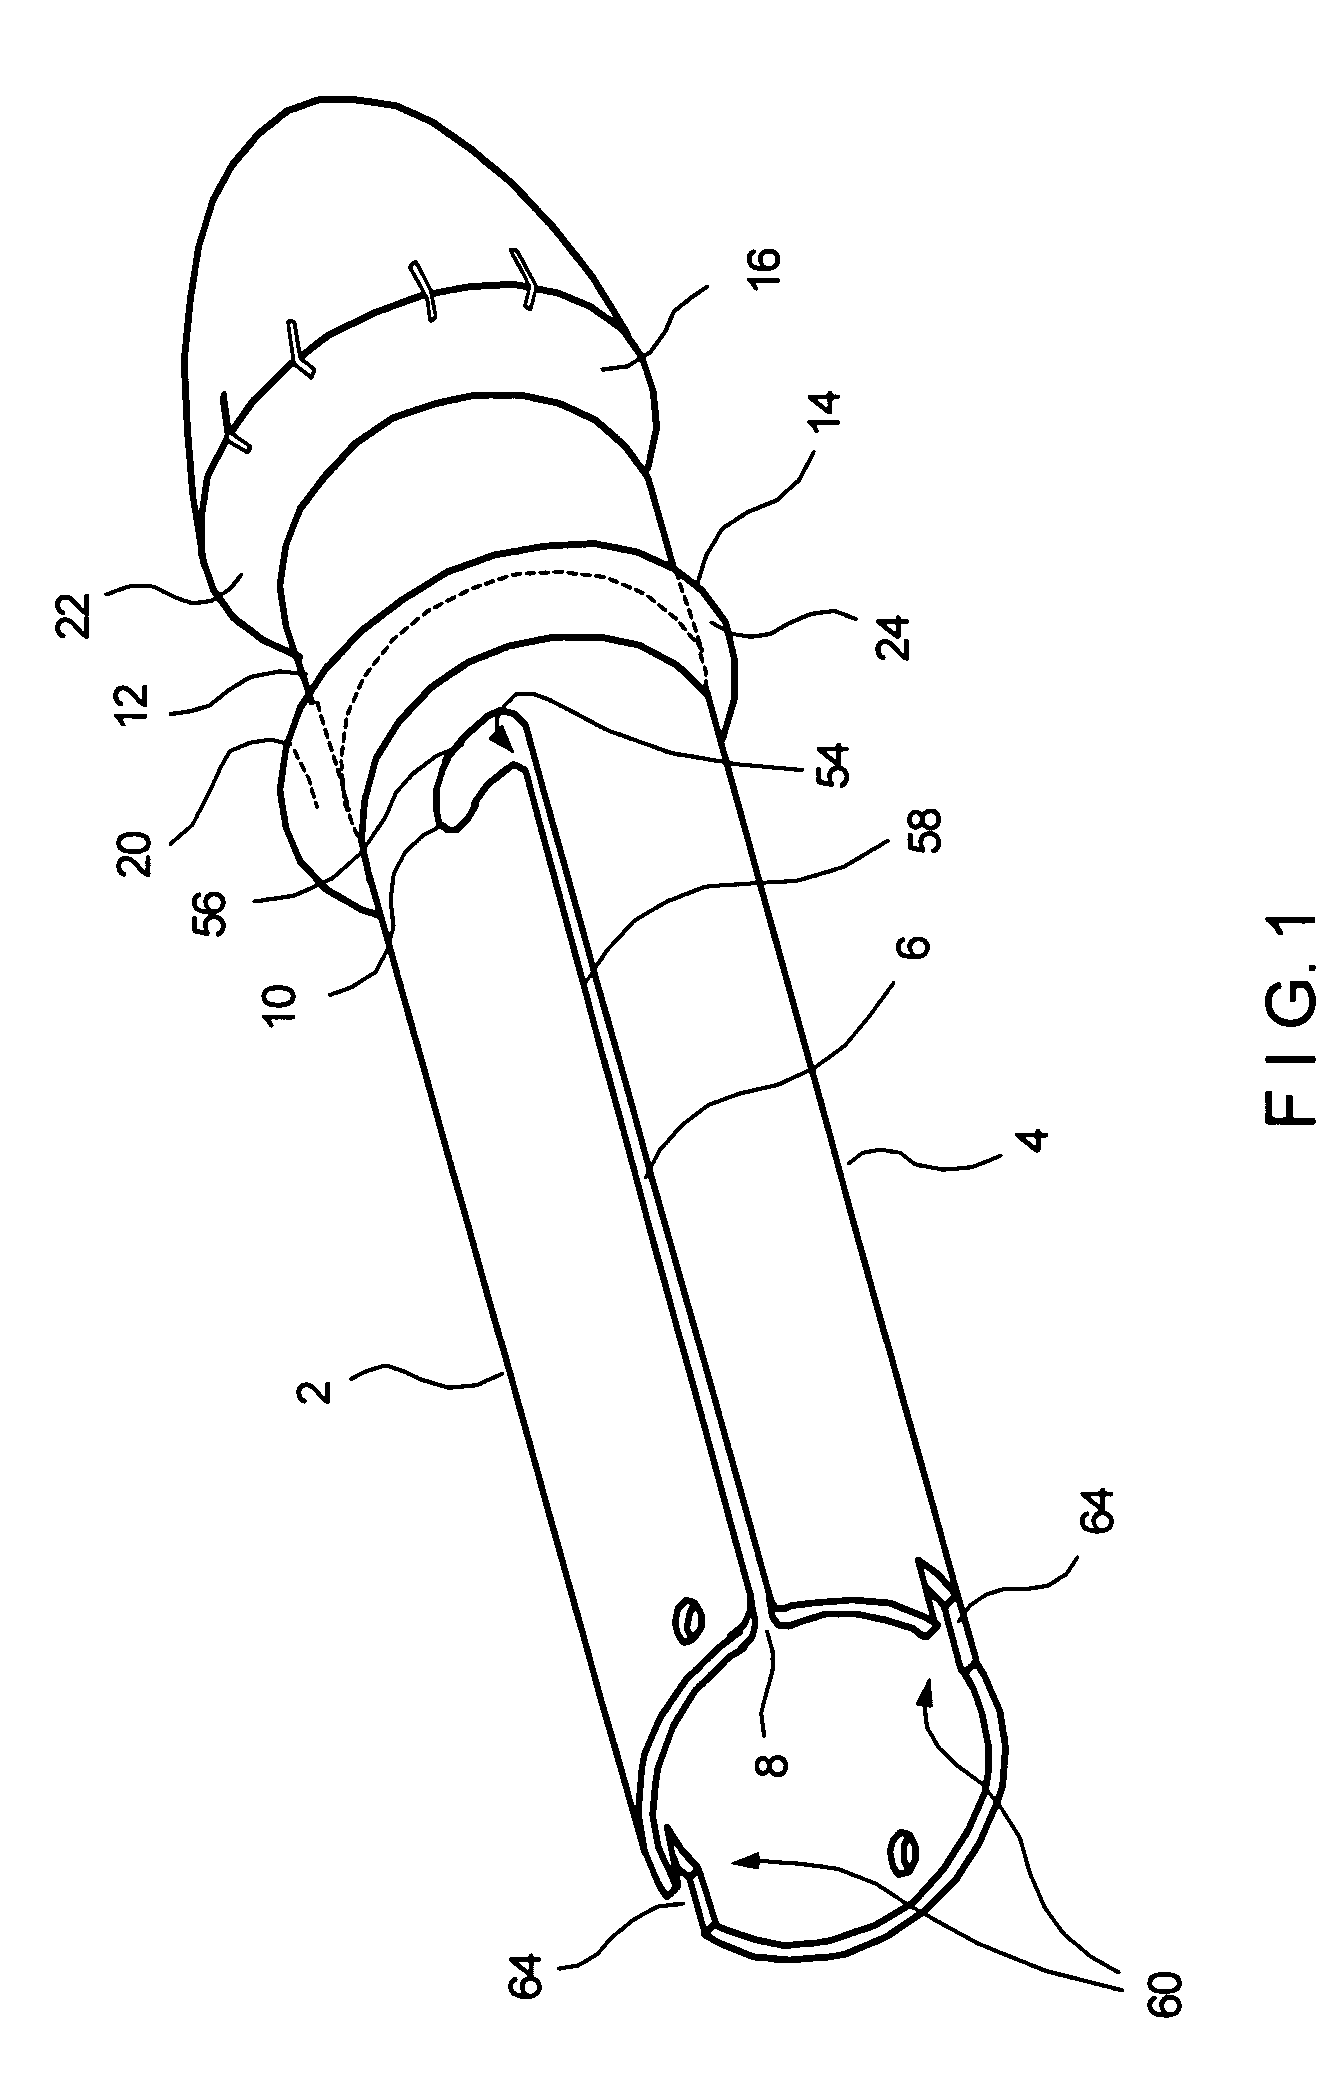 Device for launching a power kite